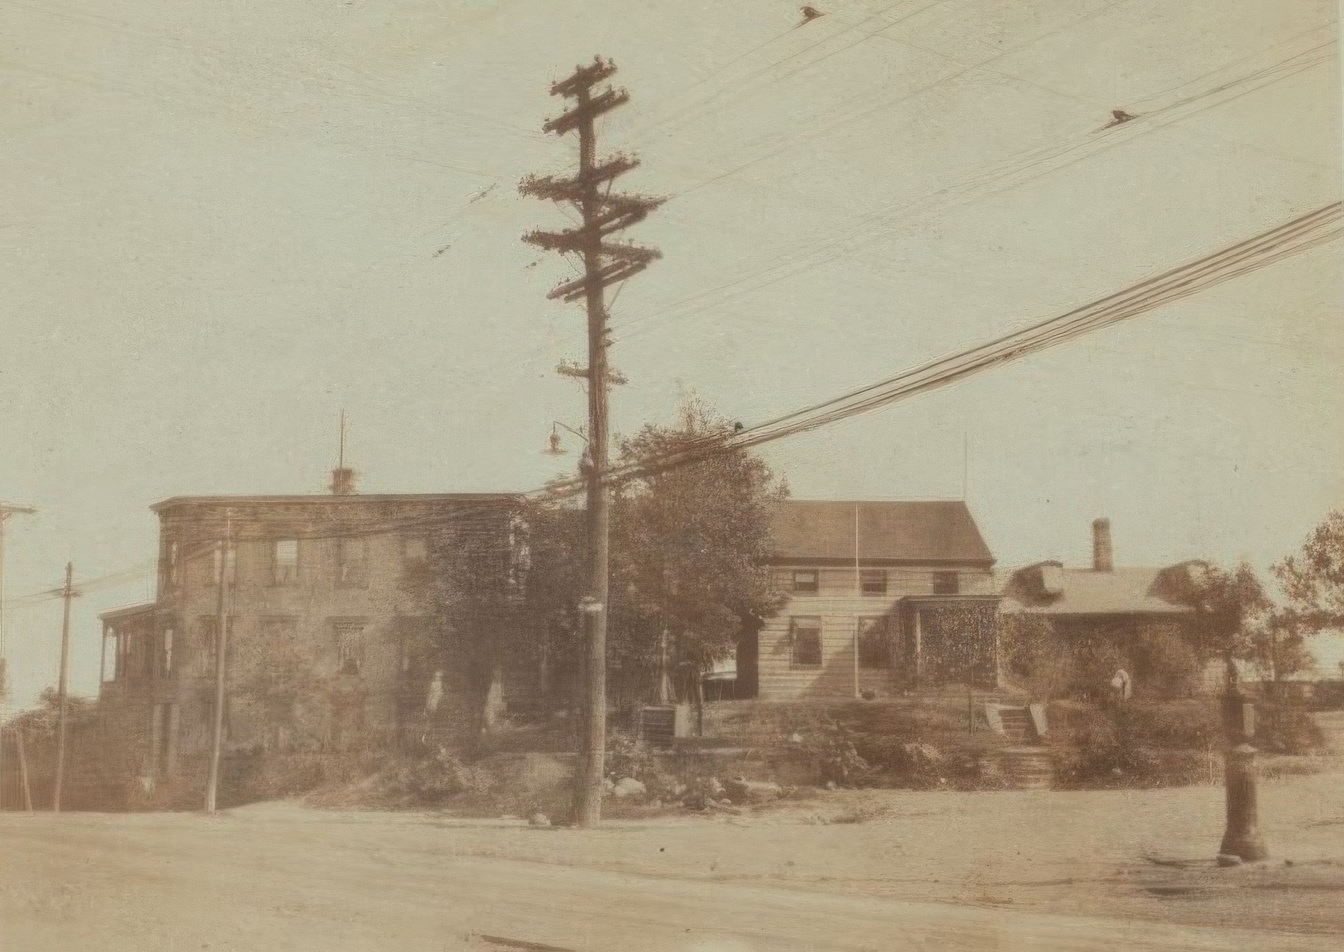 59Th Drive And Fresh Pond Road, Queens, 1900S.